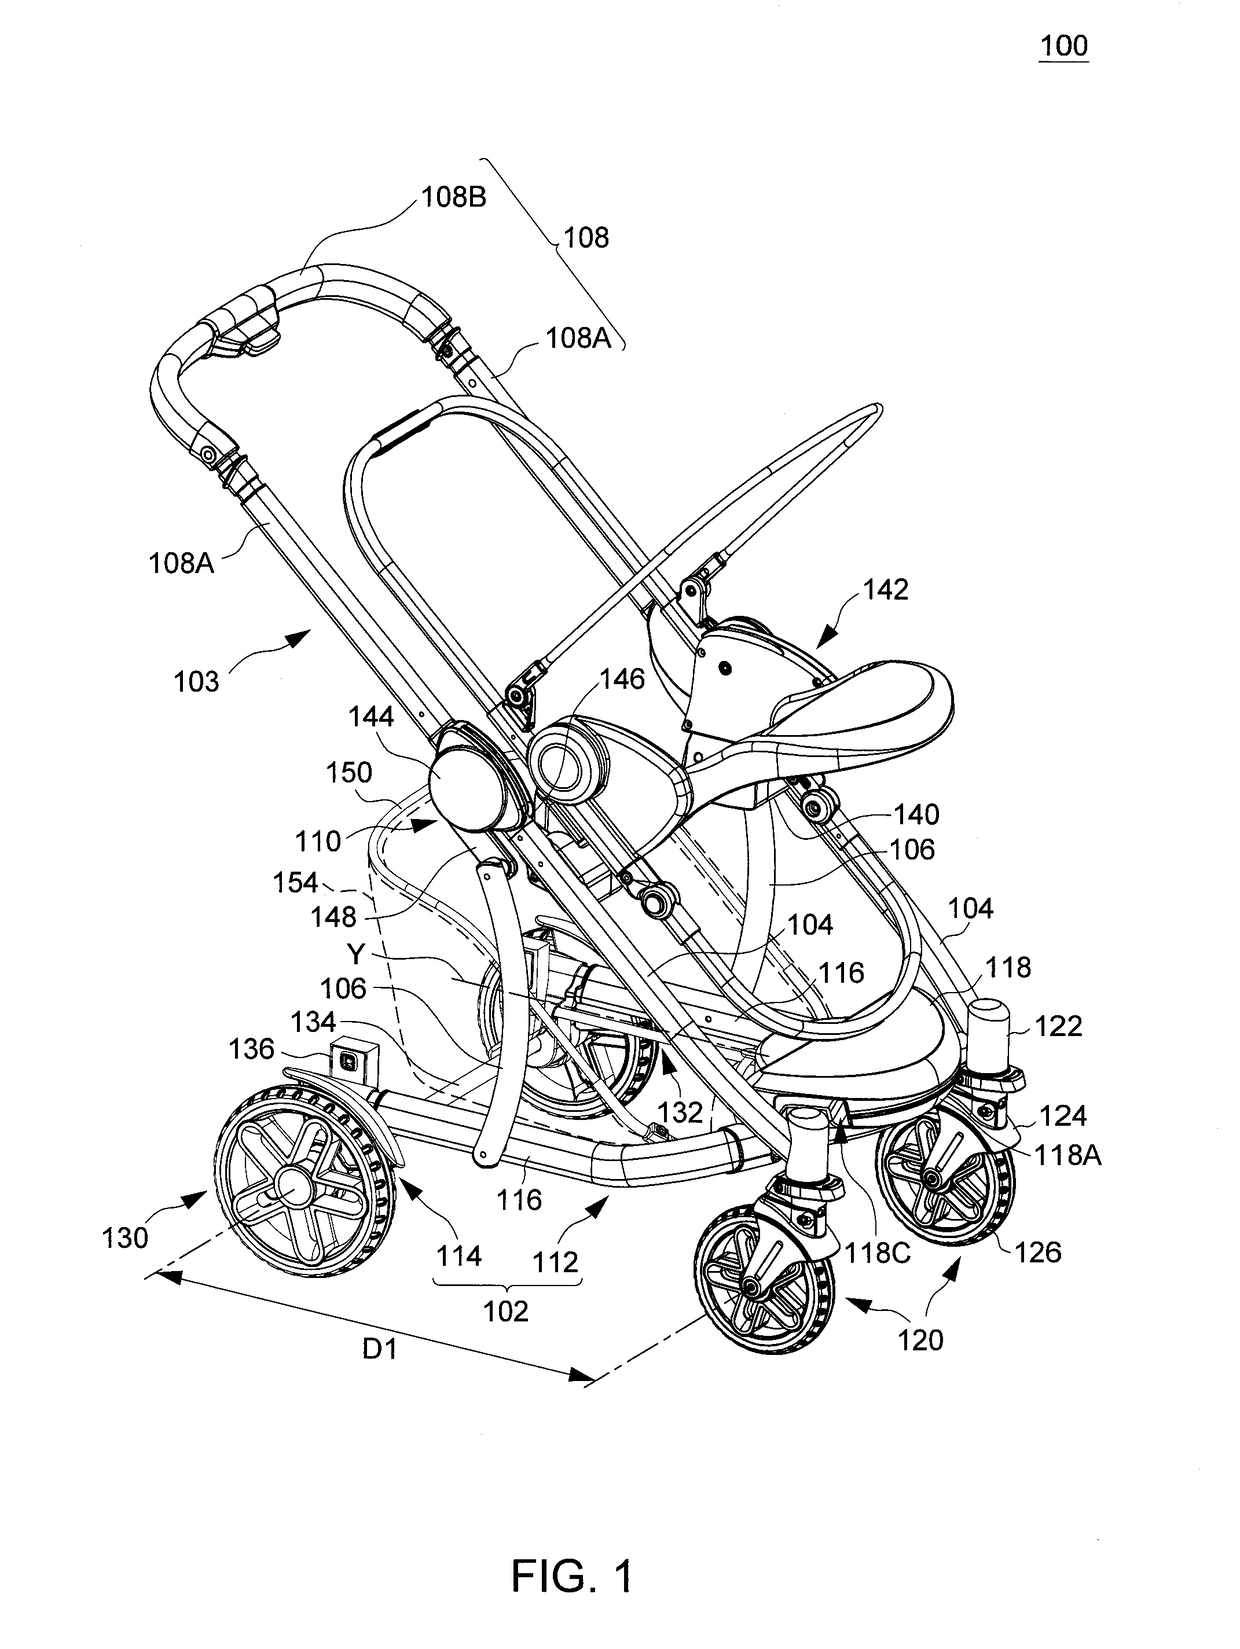 Child Stroller Apparatus Having An Expandable Frame